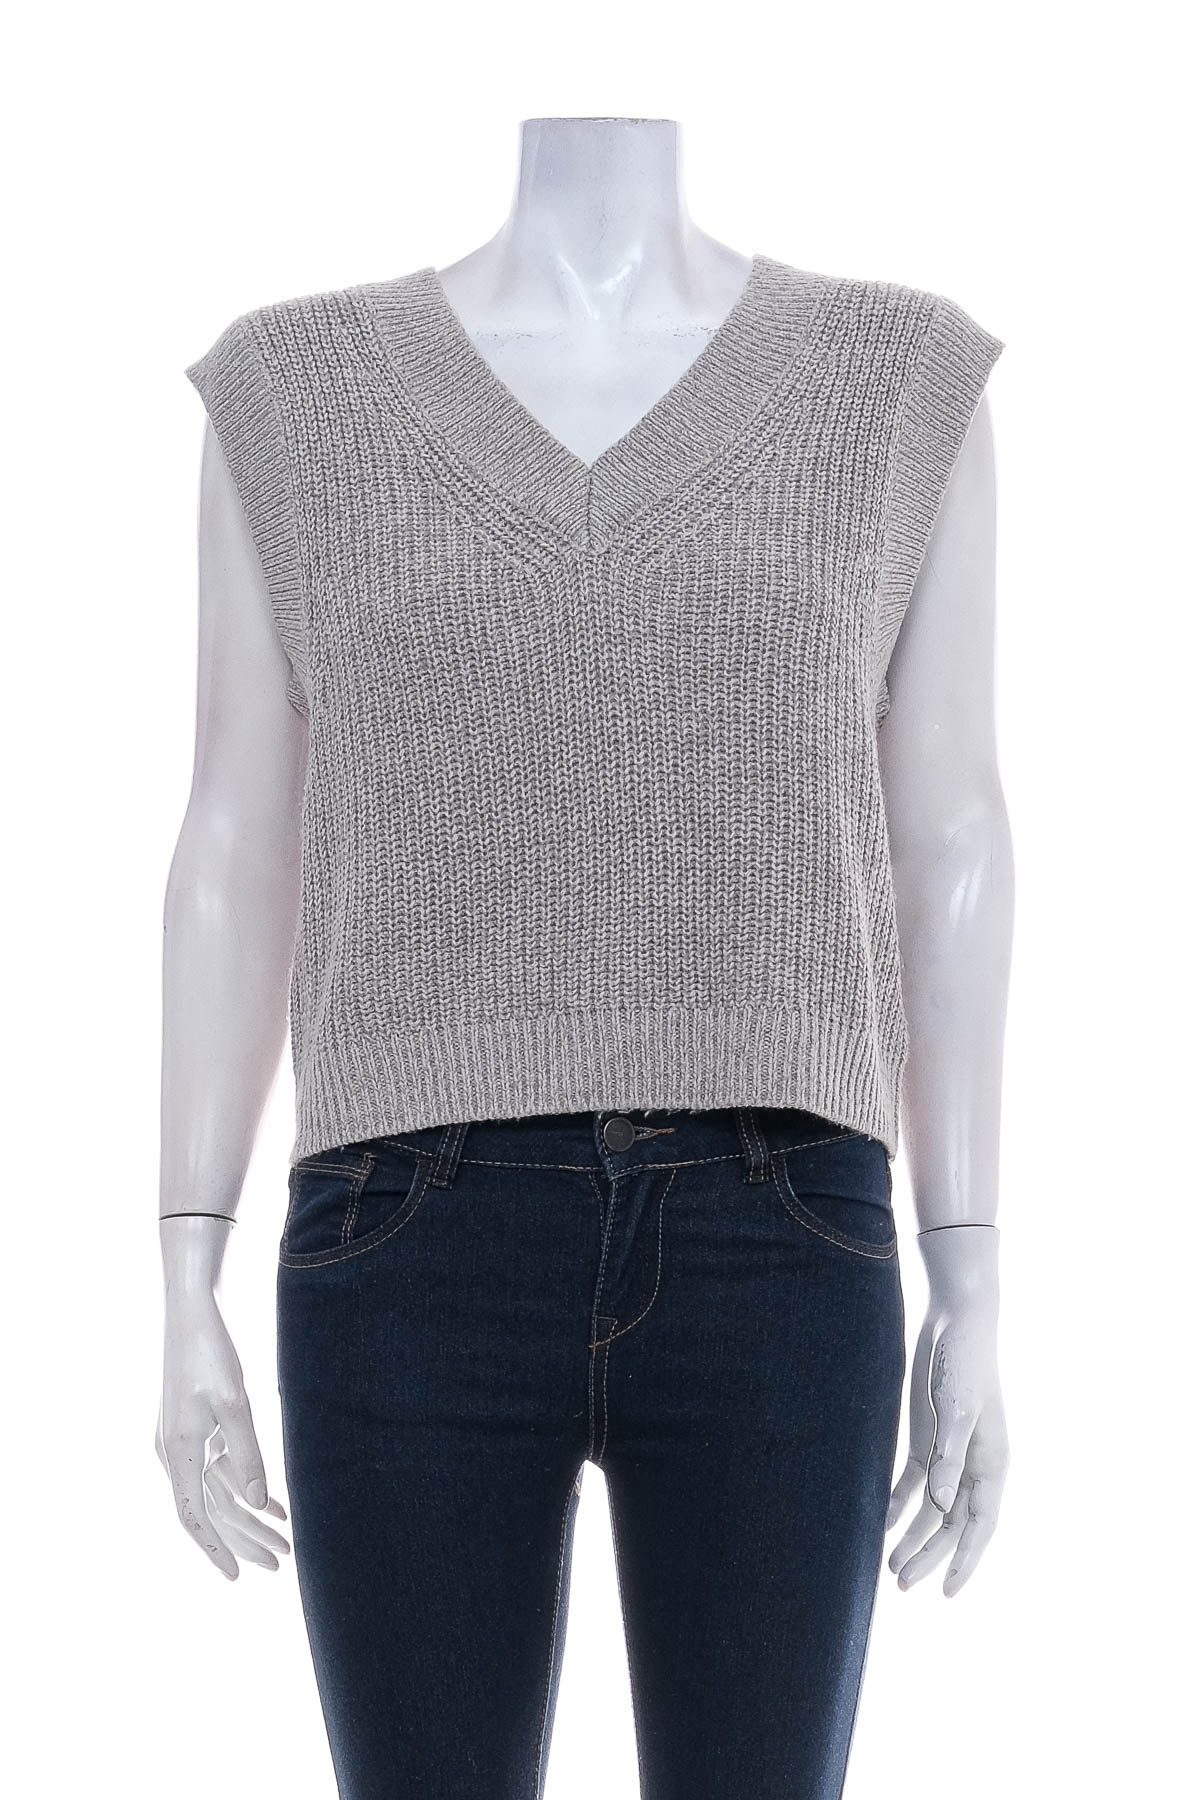 Women's sweater - DIVIDED - 0